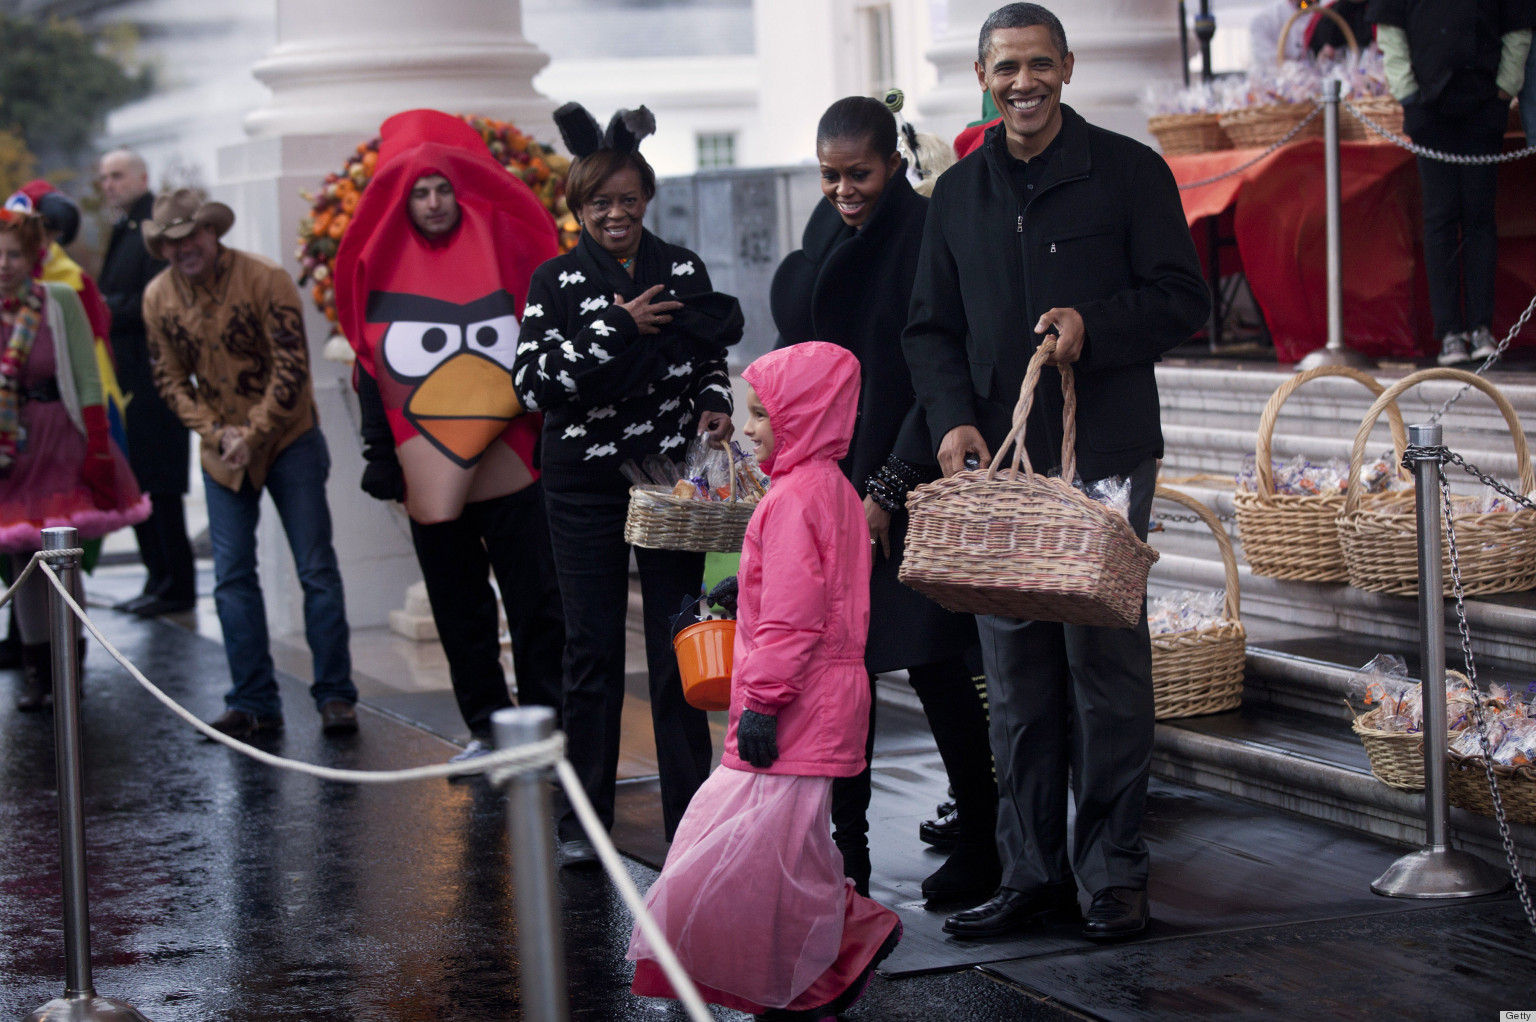 Halloween At The White House: Costumes, Candy & Puppies! (PHOTOS)